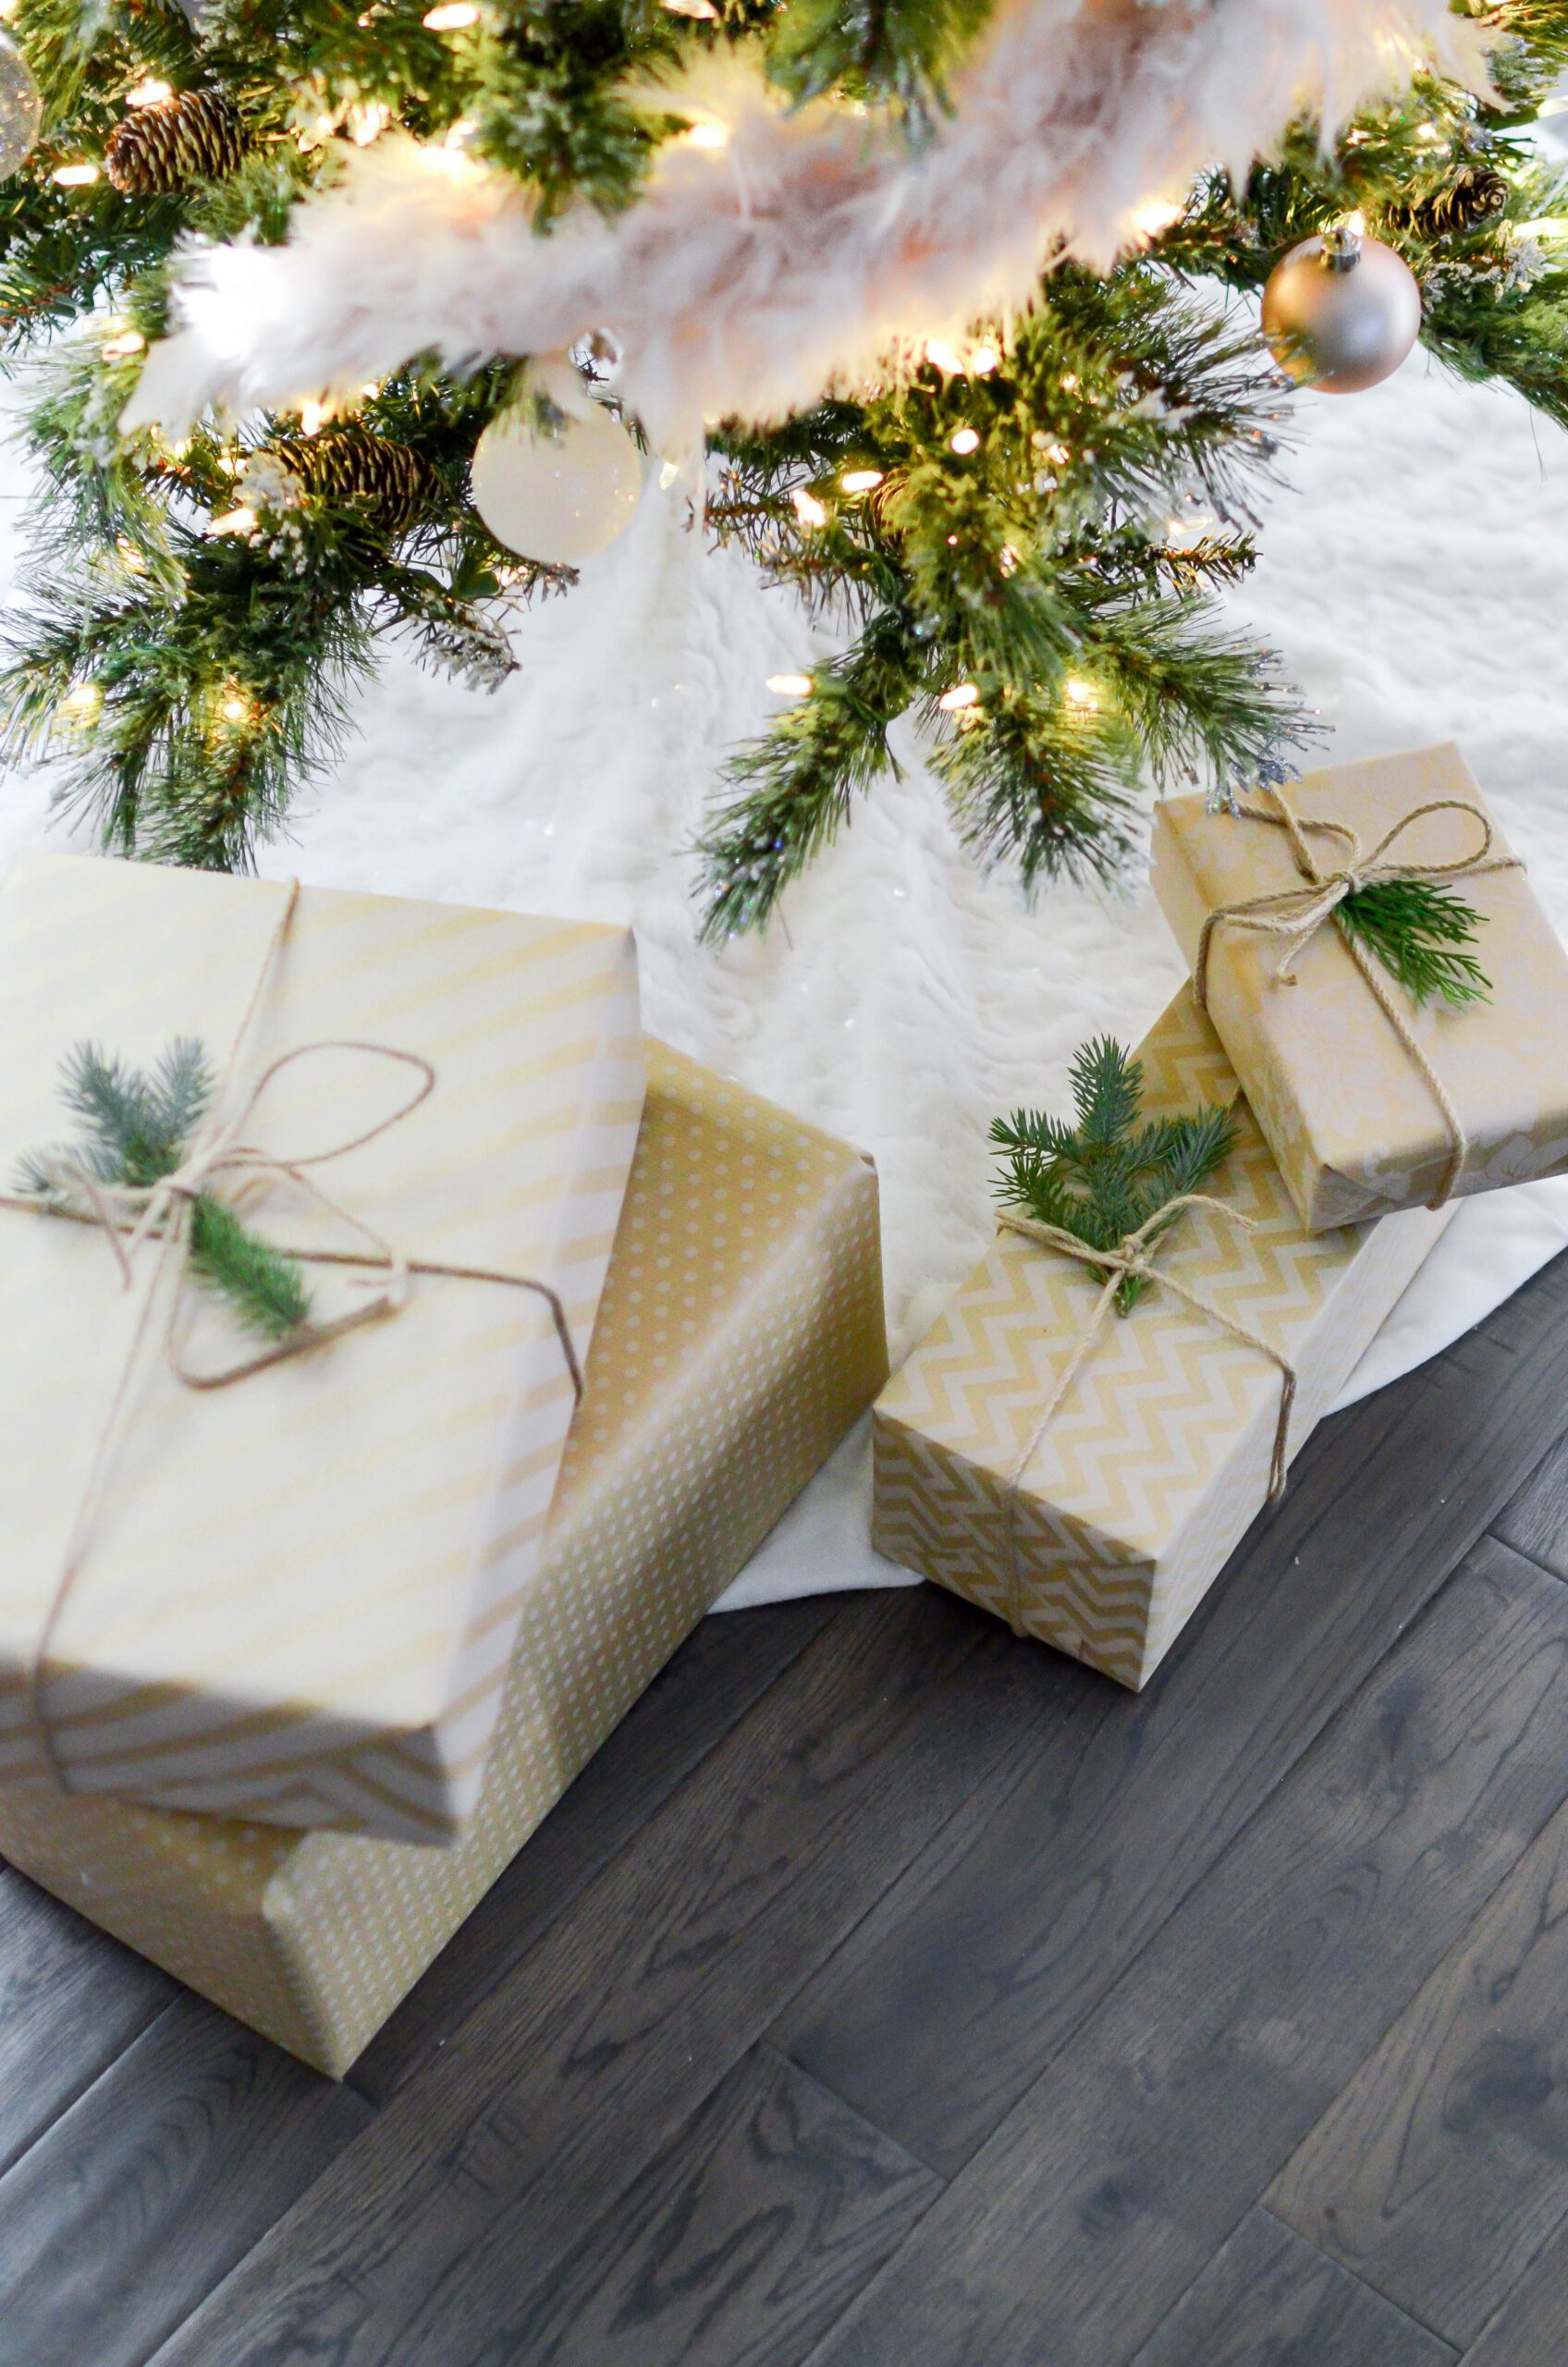 tool gifts for new homeowners – 16 ideas to give this year